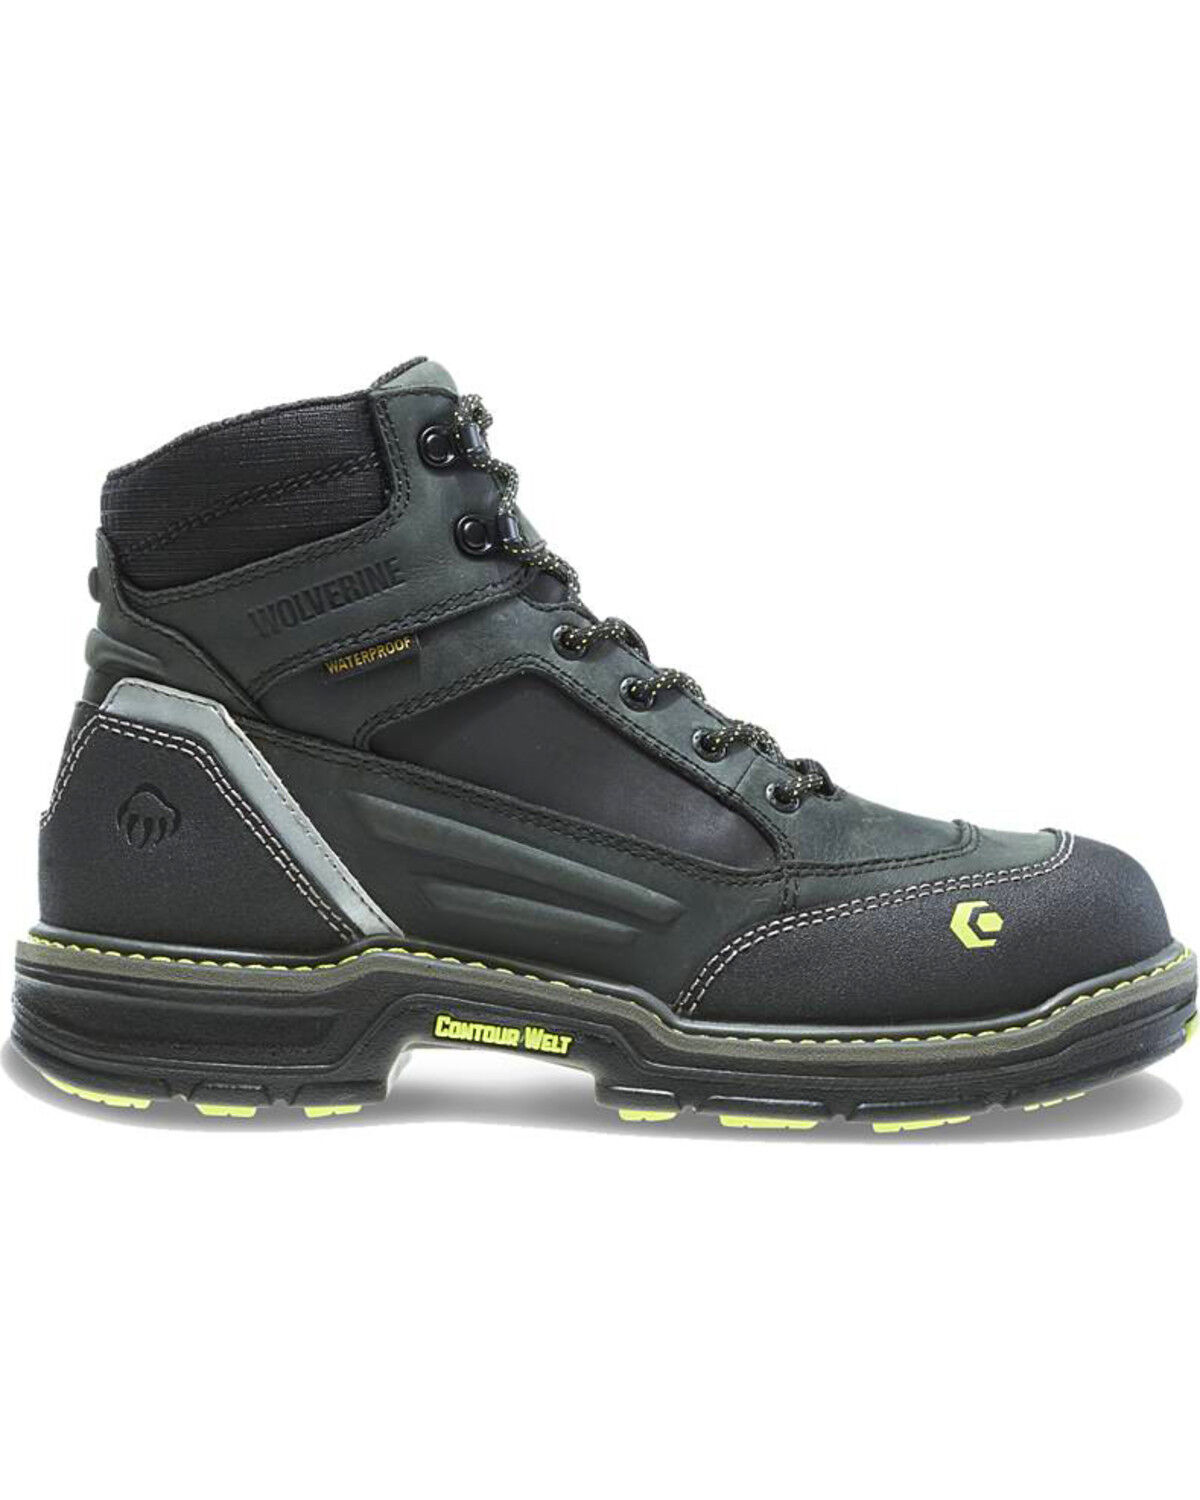 wolverine composite toe work boots